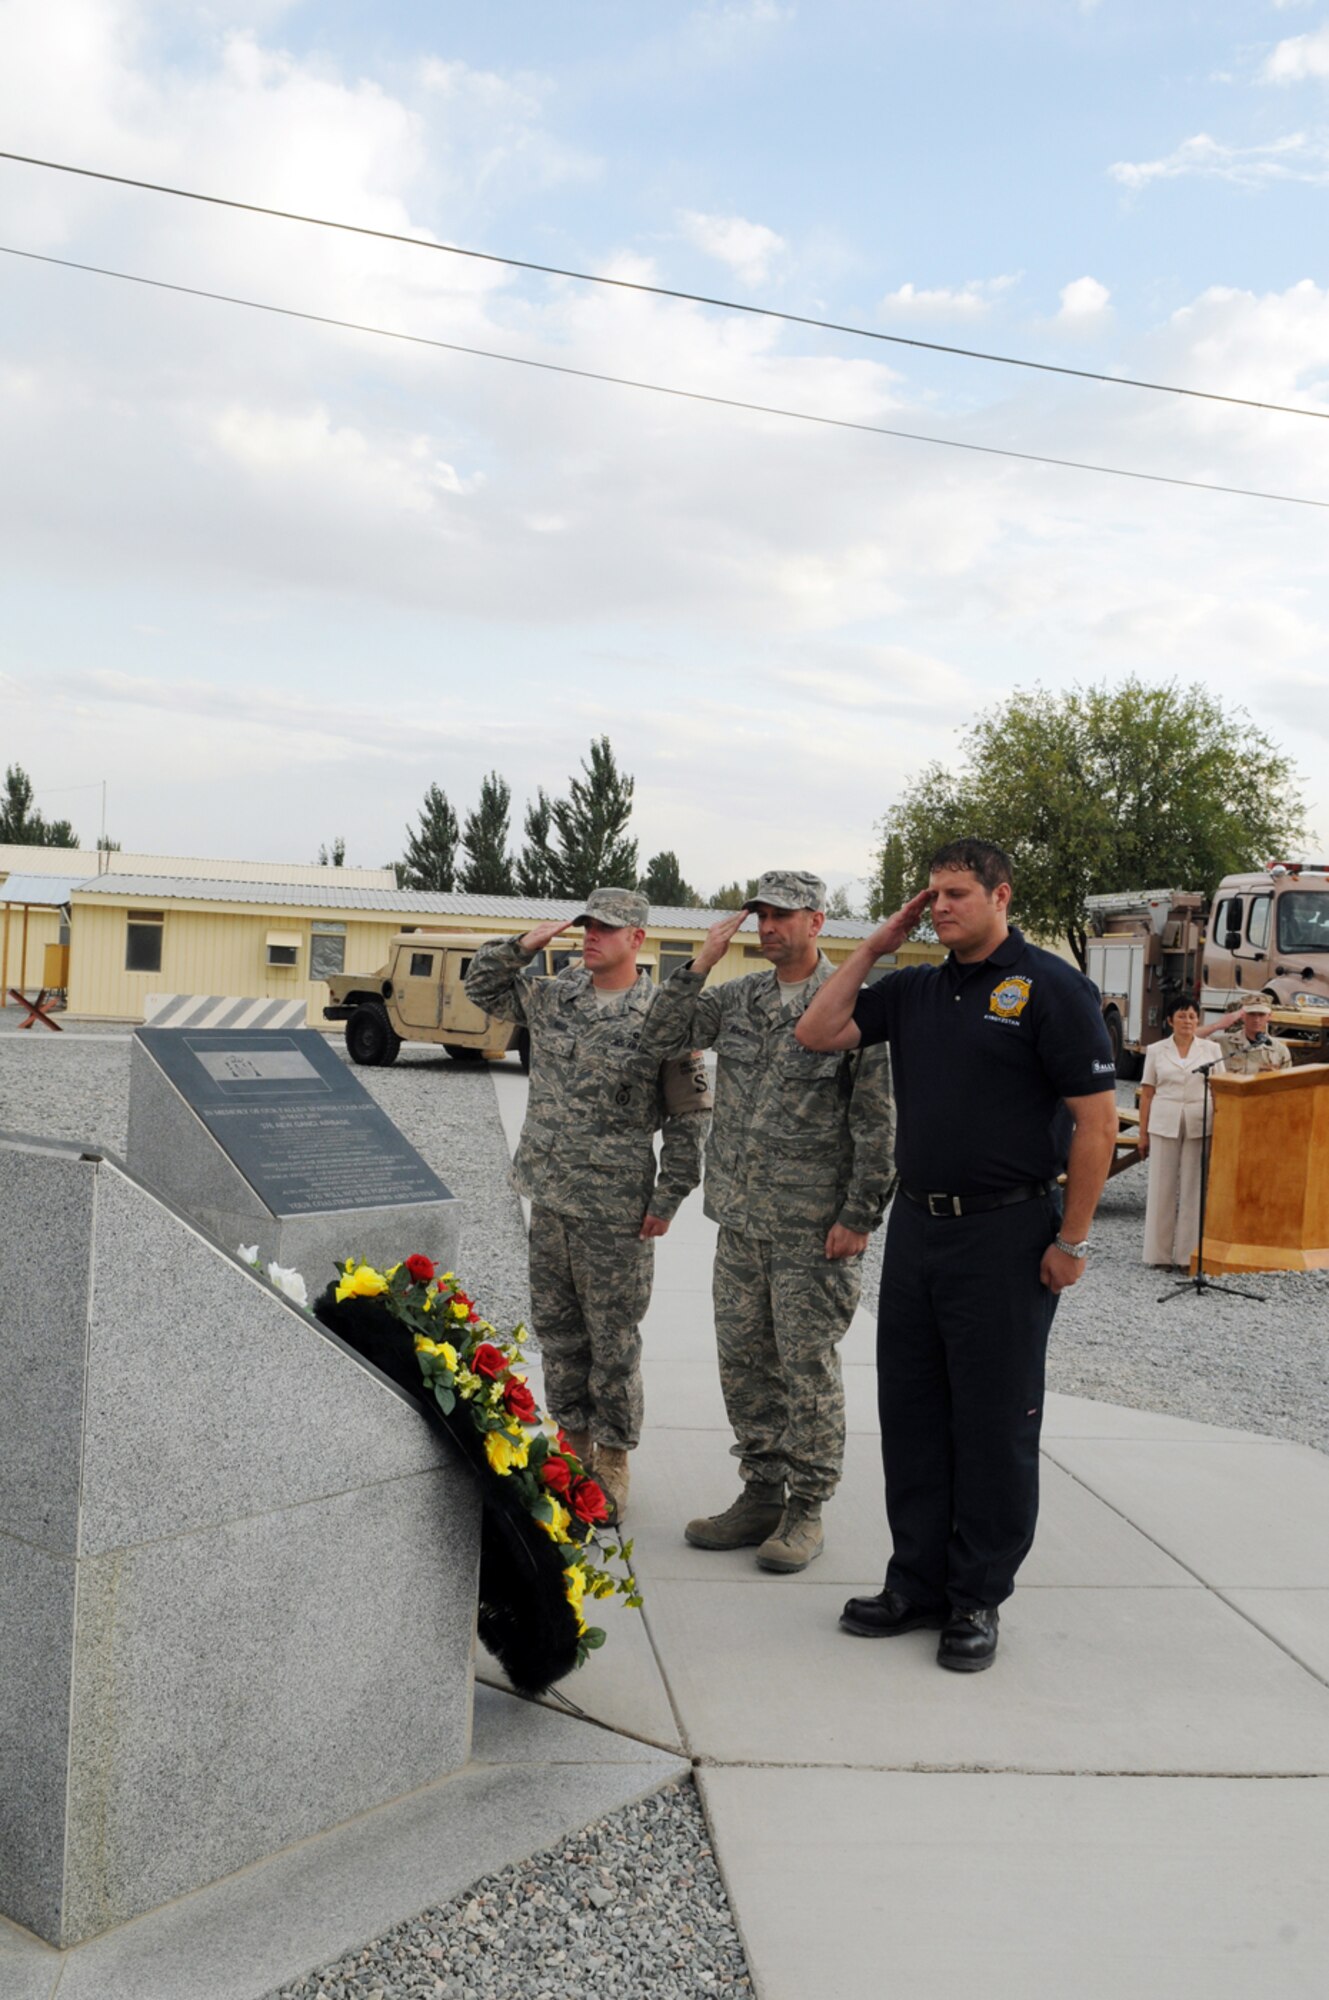 MANAS AIR BASE, KYRGYZ REPUBLIC -- Senior Airman Kevin Keller and Mr. George Parker join Col. Christopher Bence, 376th Air Expeditionary Wing commander, in rendering a salute at the Peter Ganci Jr. memorial during the Sept. 11 remembrance ceremony here. Dignitaries and representatives from ten nations joined more than 200 coalition servicemembers to pay tribute to the tragic events of 9/11 and the sacrifices made in the Global War on Terrorism since. (Air Force photo / Senior Airman Ruth Holcomb)  